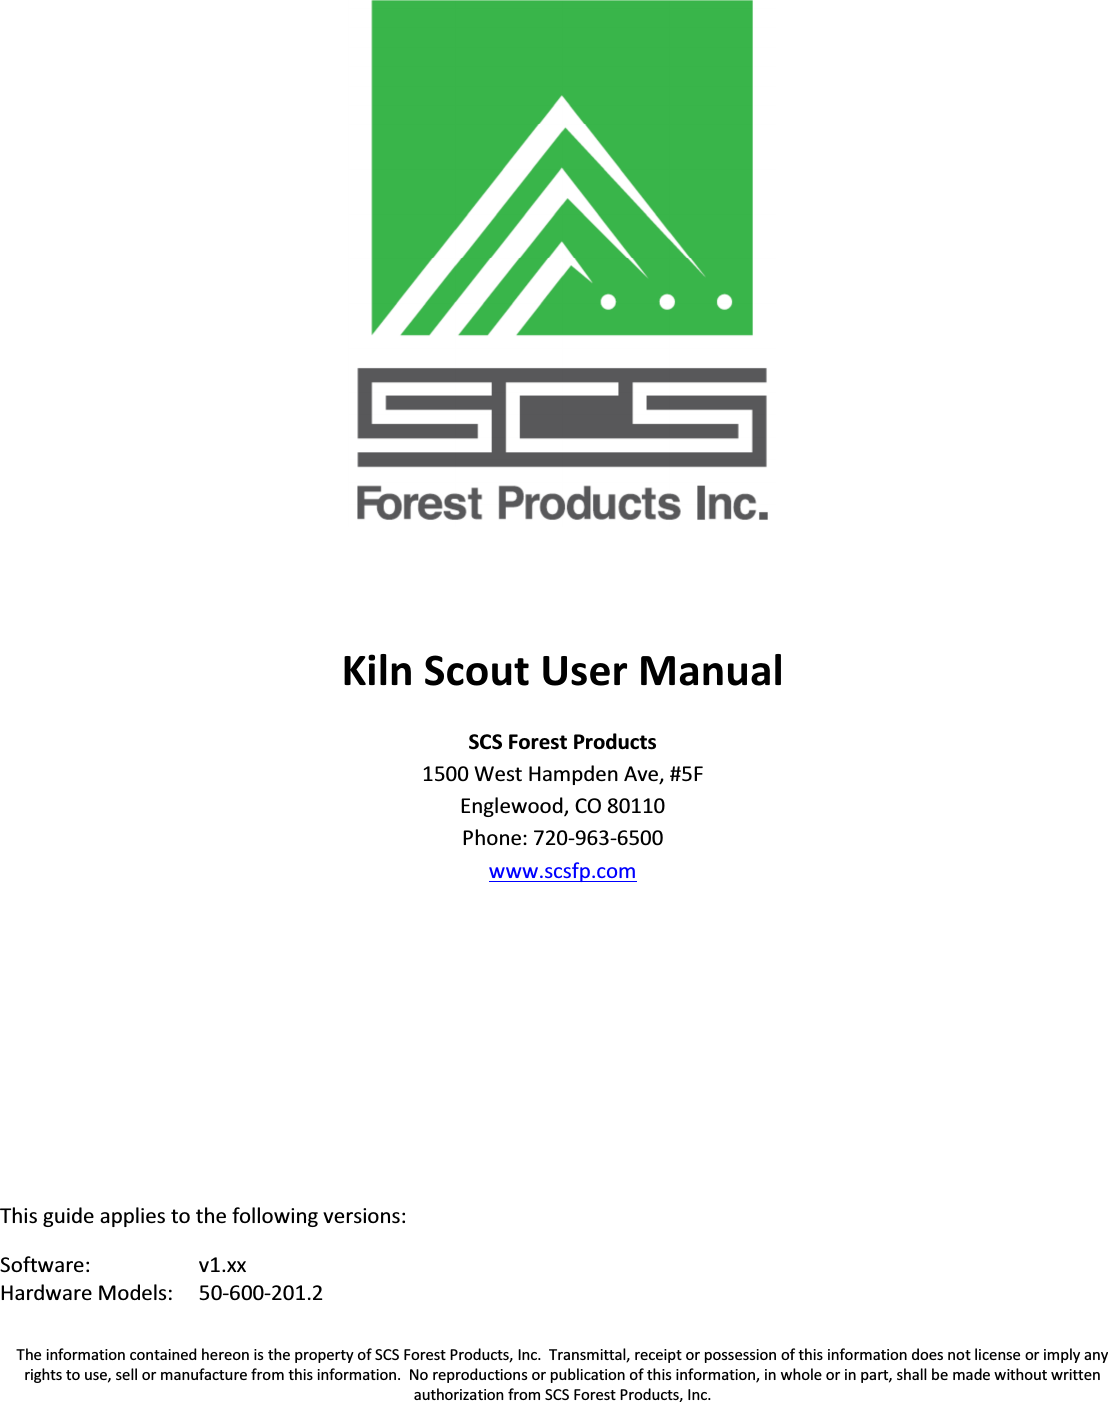 The information contained hereon is the property of SCS Forest Products, Inc.  Transmittal, receipt or possession of this information does not license or imply any rights to use, sell or manufacture from this information.  No reproductions or publication of this information, in whole or in part, shall be made without written authorization from SCS Forest Products, Inc.    Kiln Scout User Manual SCS Forest Products 1500 West Hampden Ave, #5F Englewood, CO 80110 Phone: 720-963-6500 www.scsfp.com       This guide applies to the following versions: Software: v1.xx Hardware Models: 50-600-201.2    